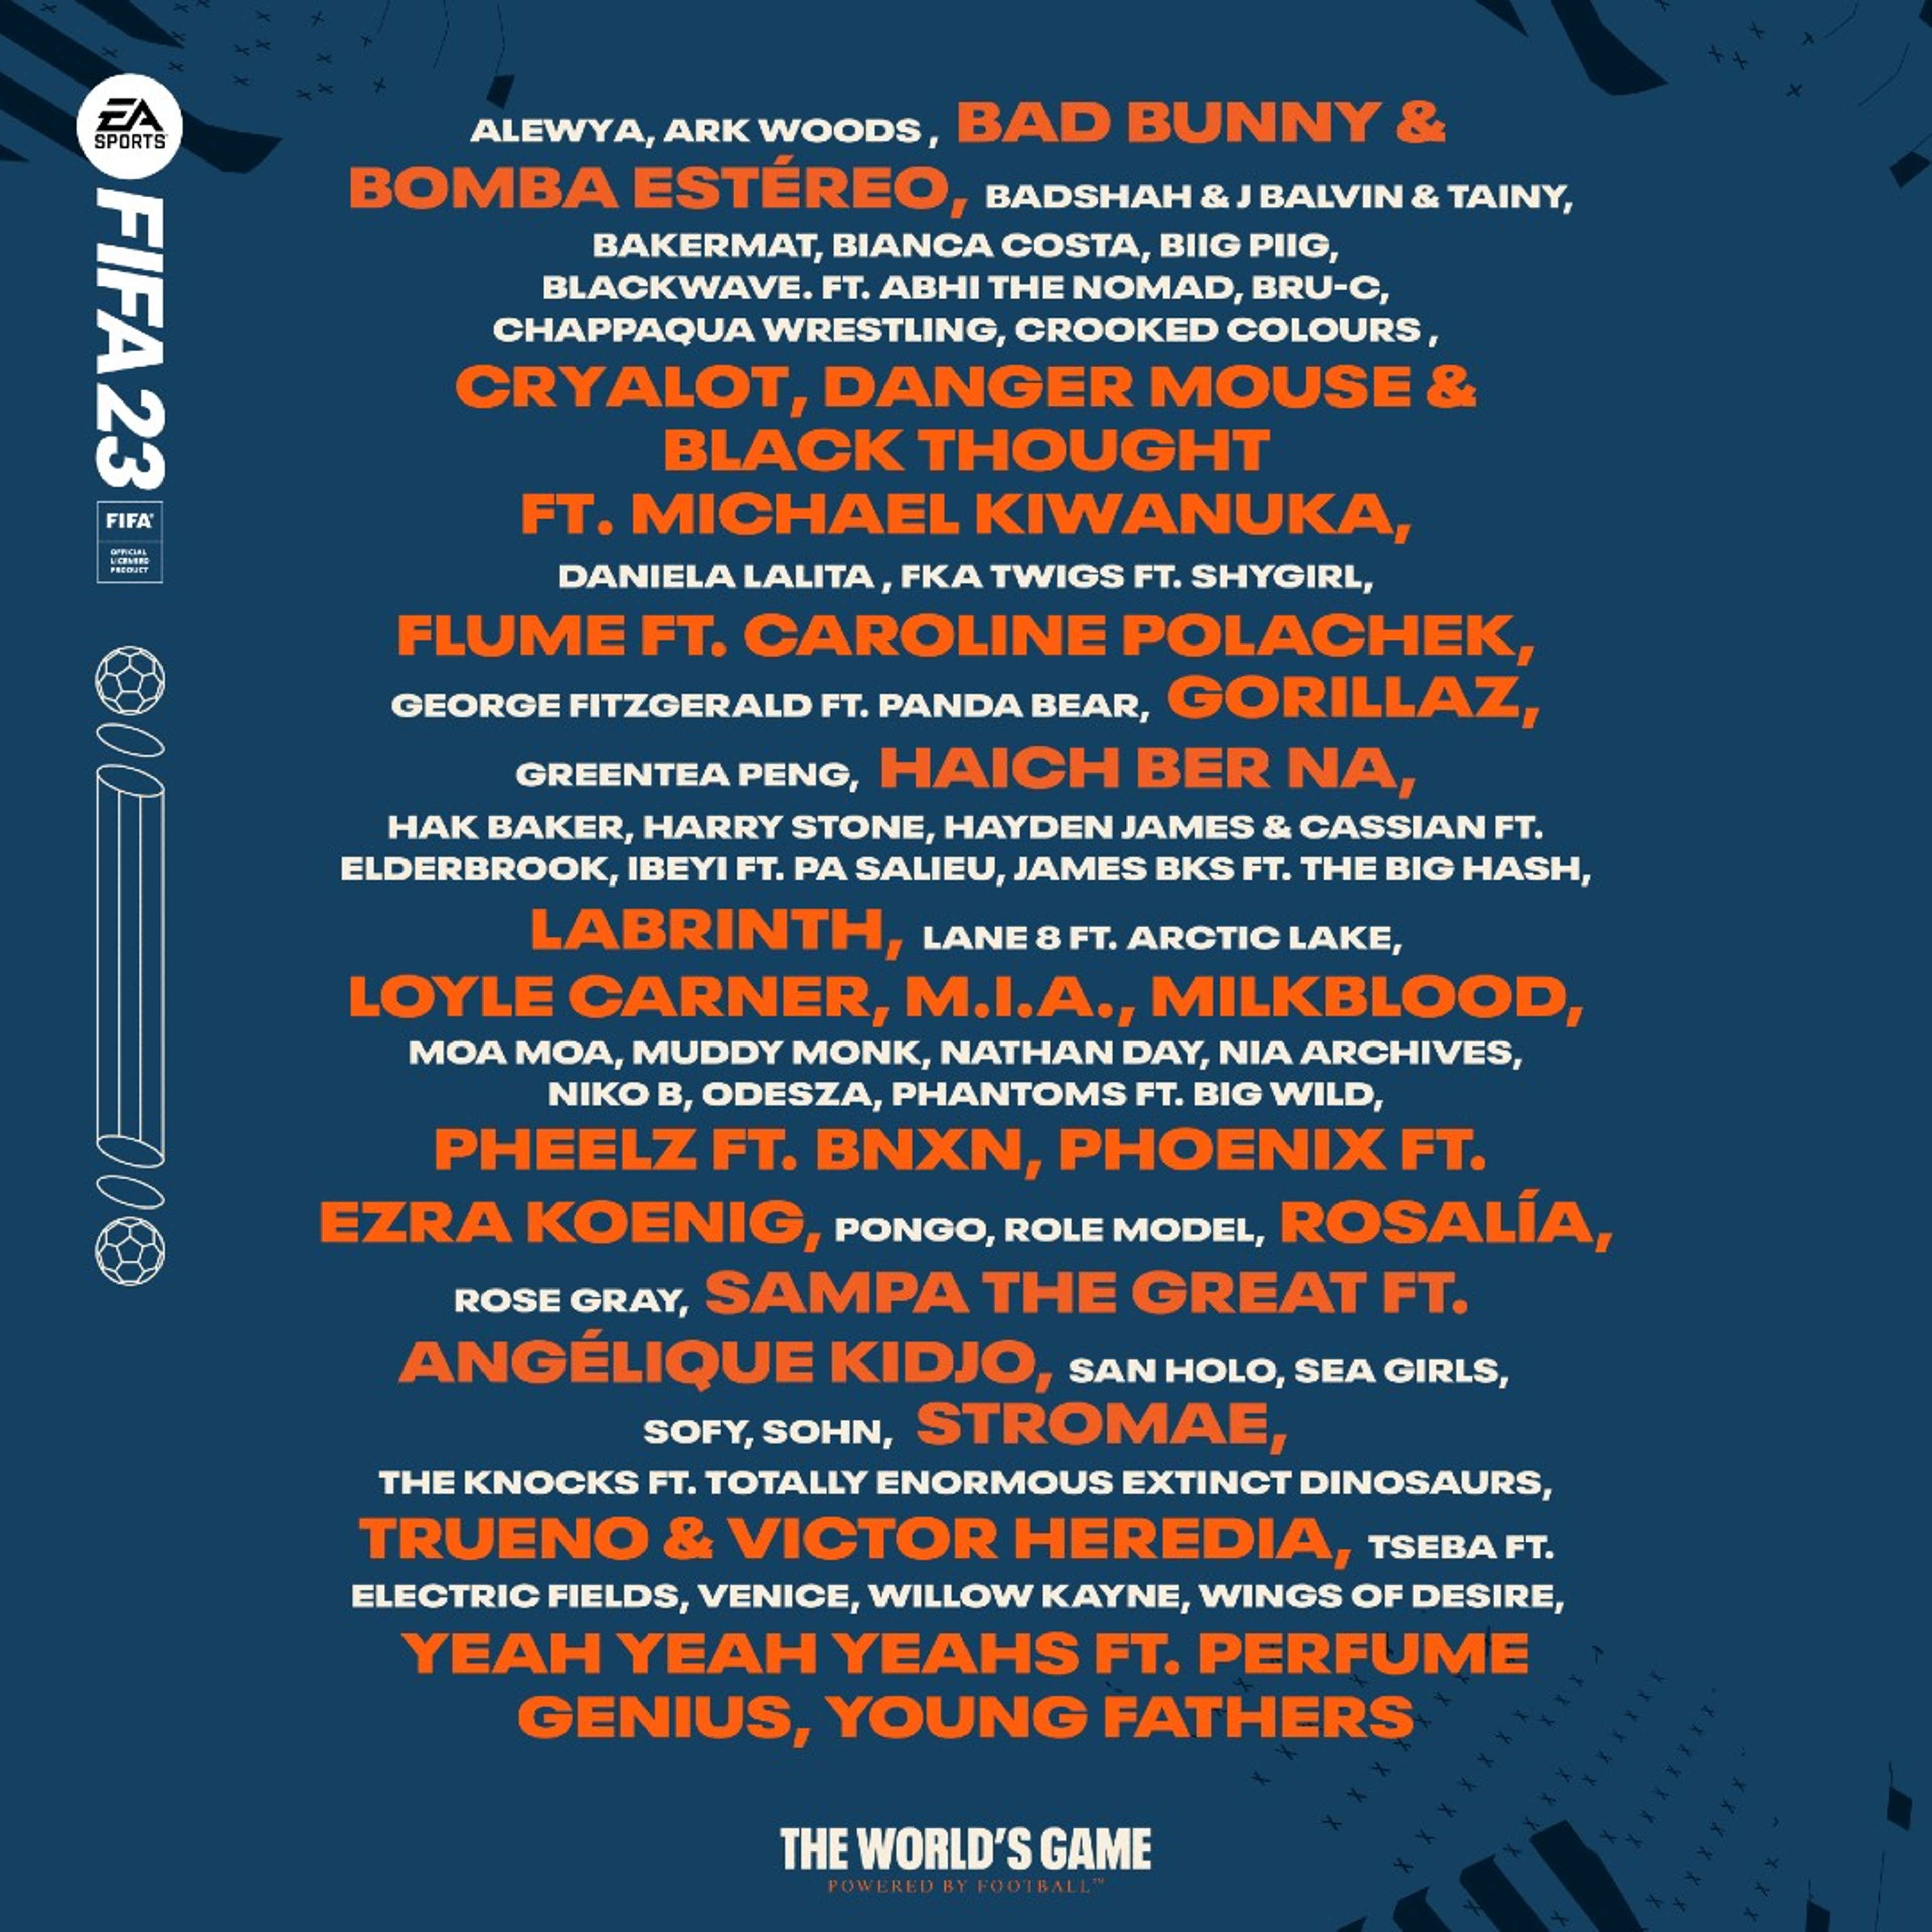 FIFA 23 Soundtrack Out Now on Spotify, Labrinth and Bad Bunny Part of  Lineup